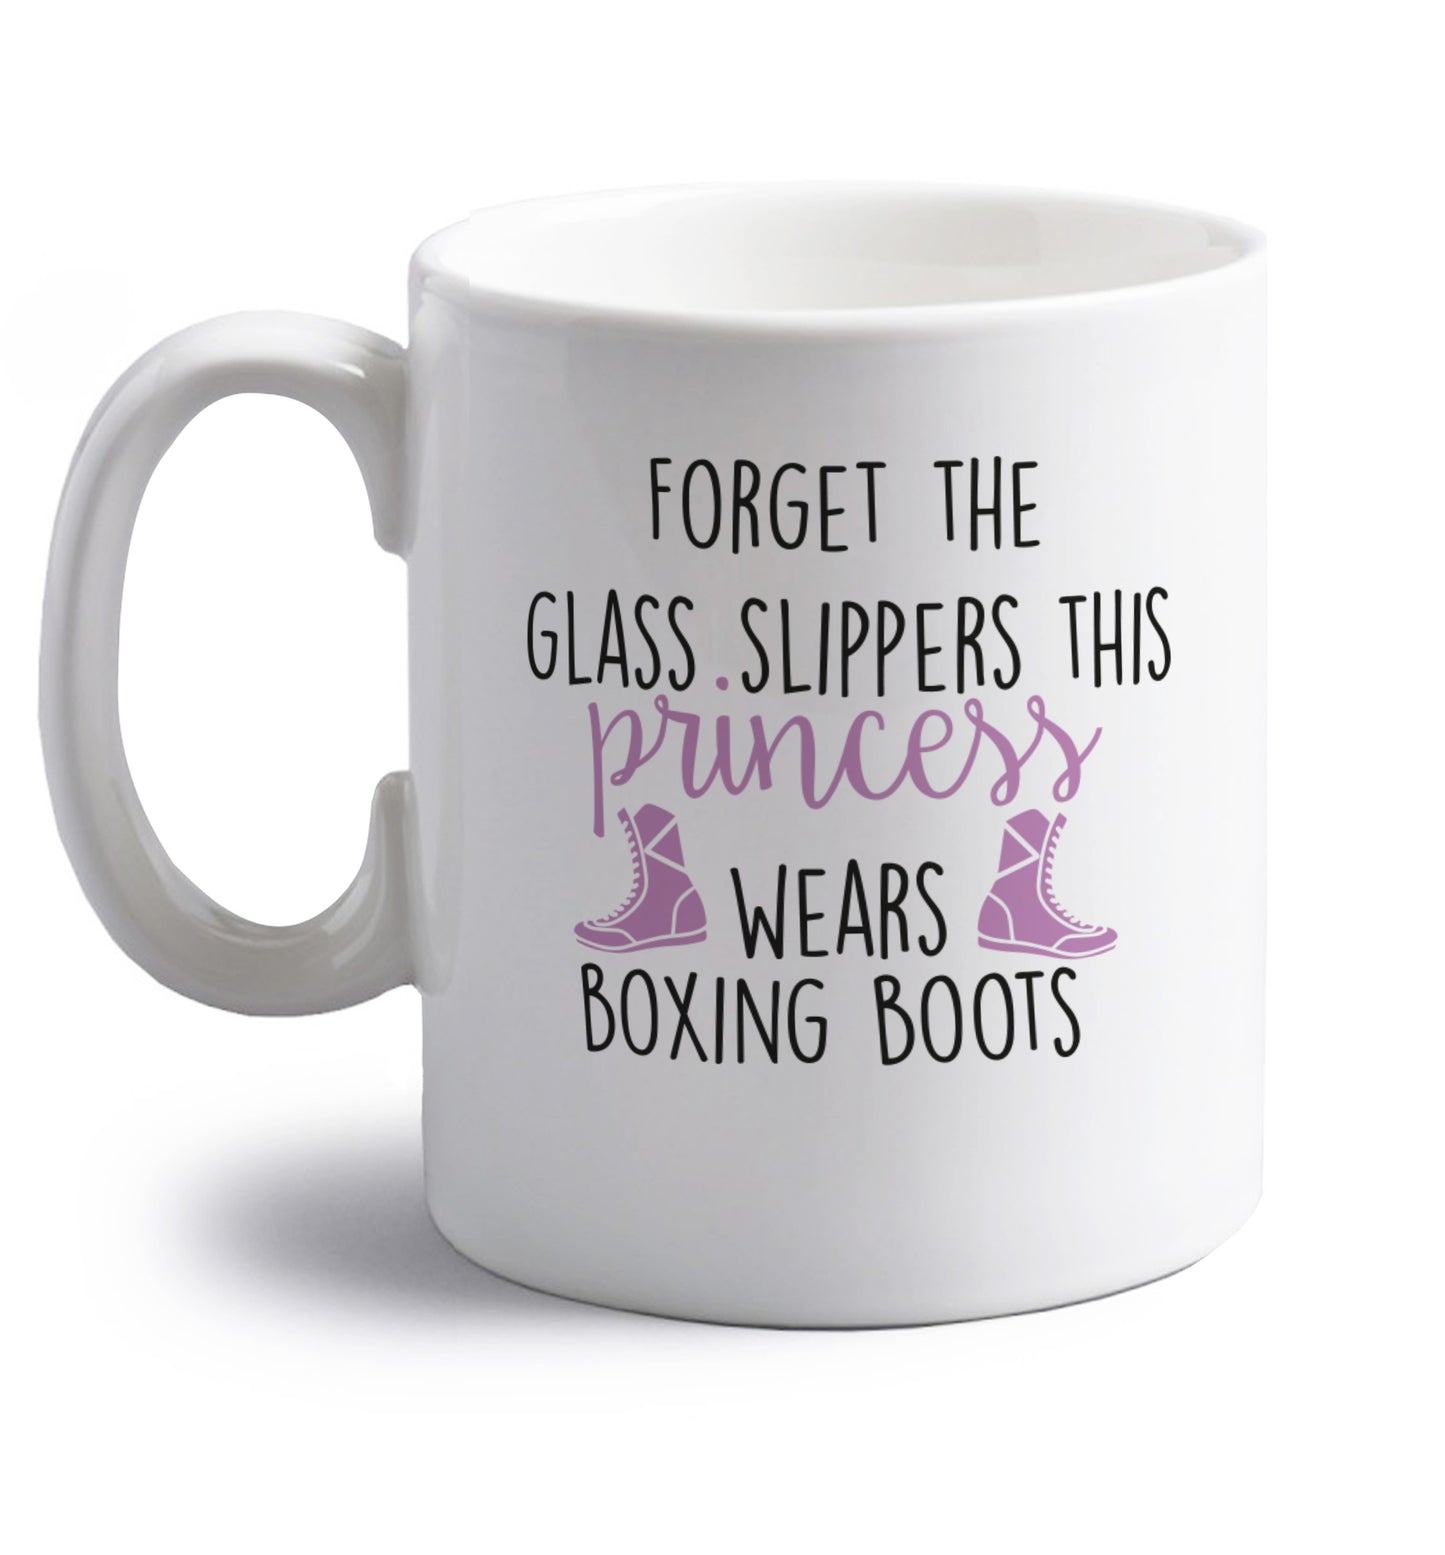 Forget the glass slippers this princess wears boxing boots right handed white ceramic mug 